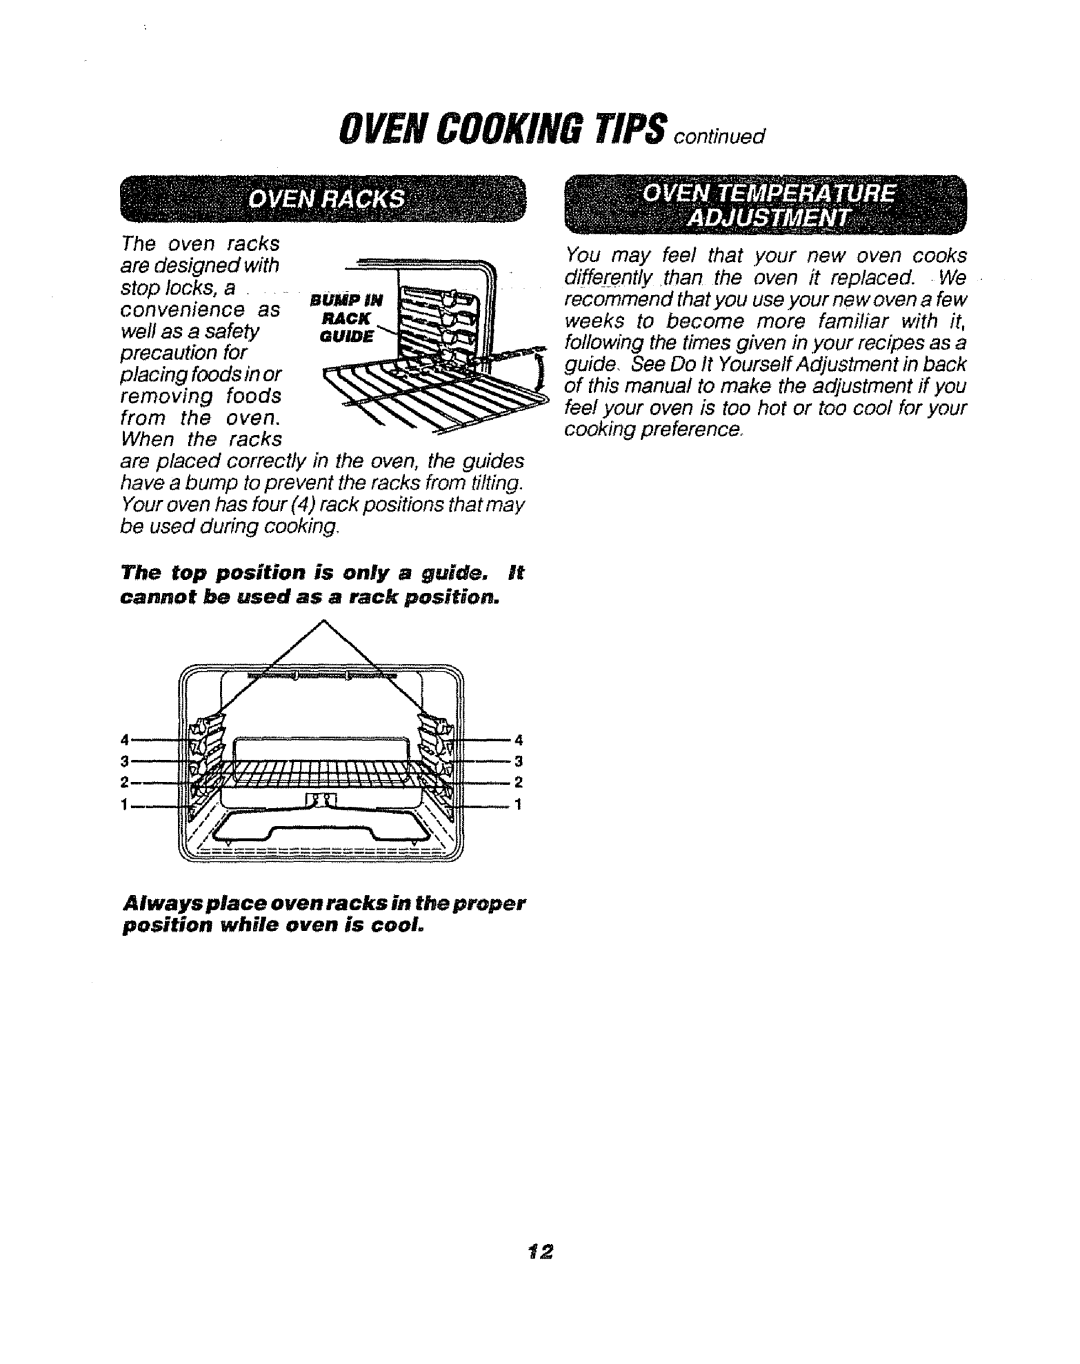 Sears 911. 47169 owner manual OVENCOOKINGTIPScontinued, Always place oven racks in the proper, position while oven is cool 